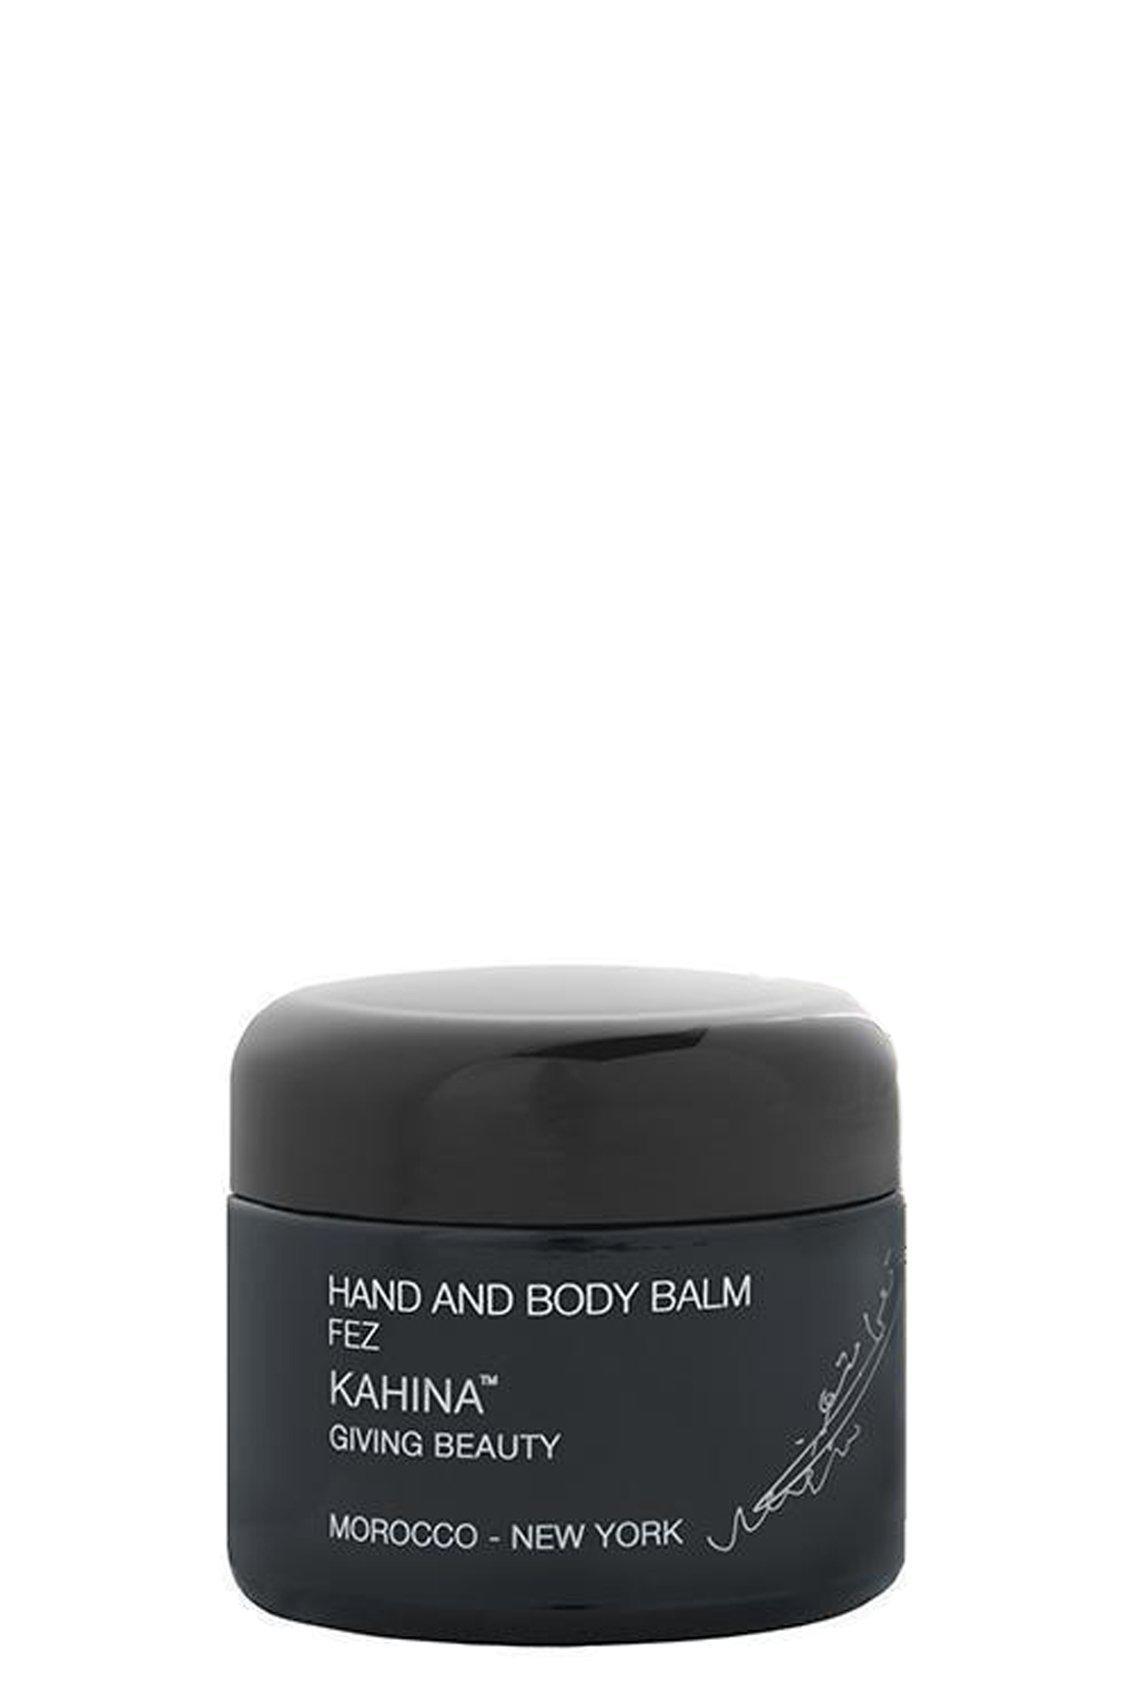 Indisponible : FEZ Hand and Body Balm - Baume Pour Le Corps FEZ Unavailable: FEZ Hand and Body Balm - Baume Pour Le Corps FEZ - Kahina Giving Beauty